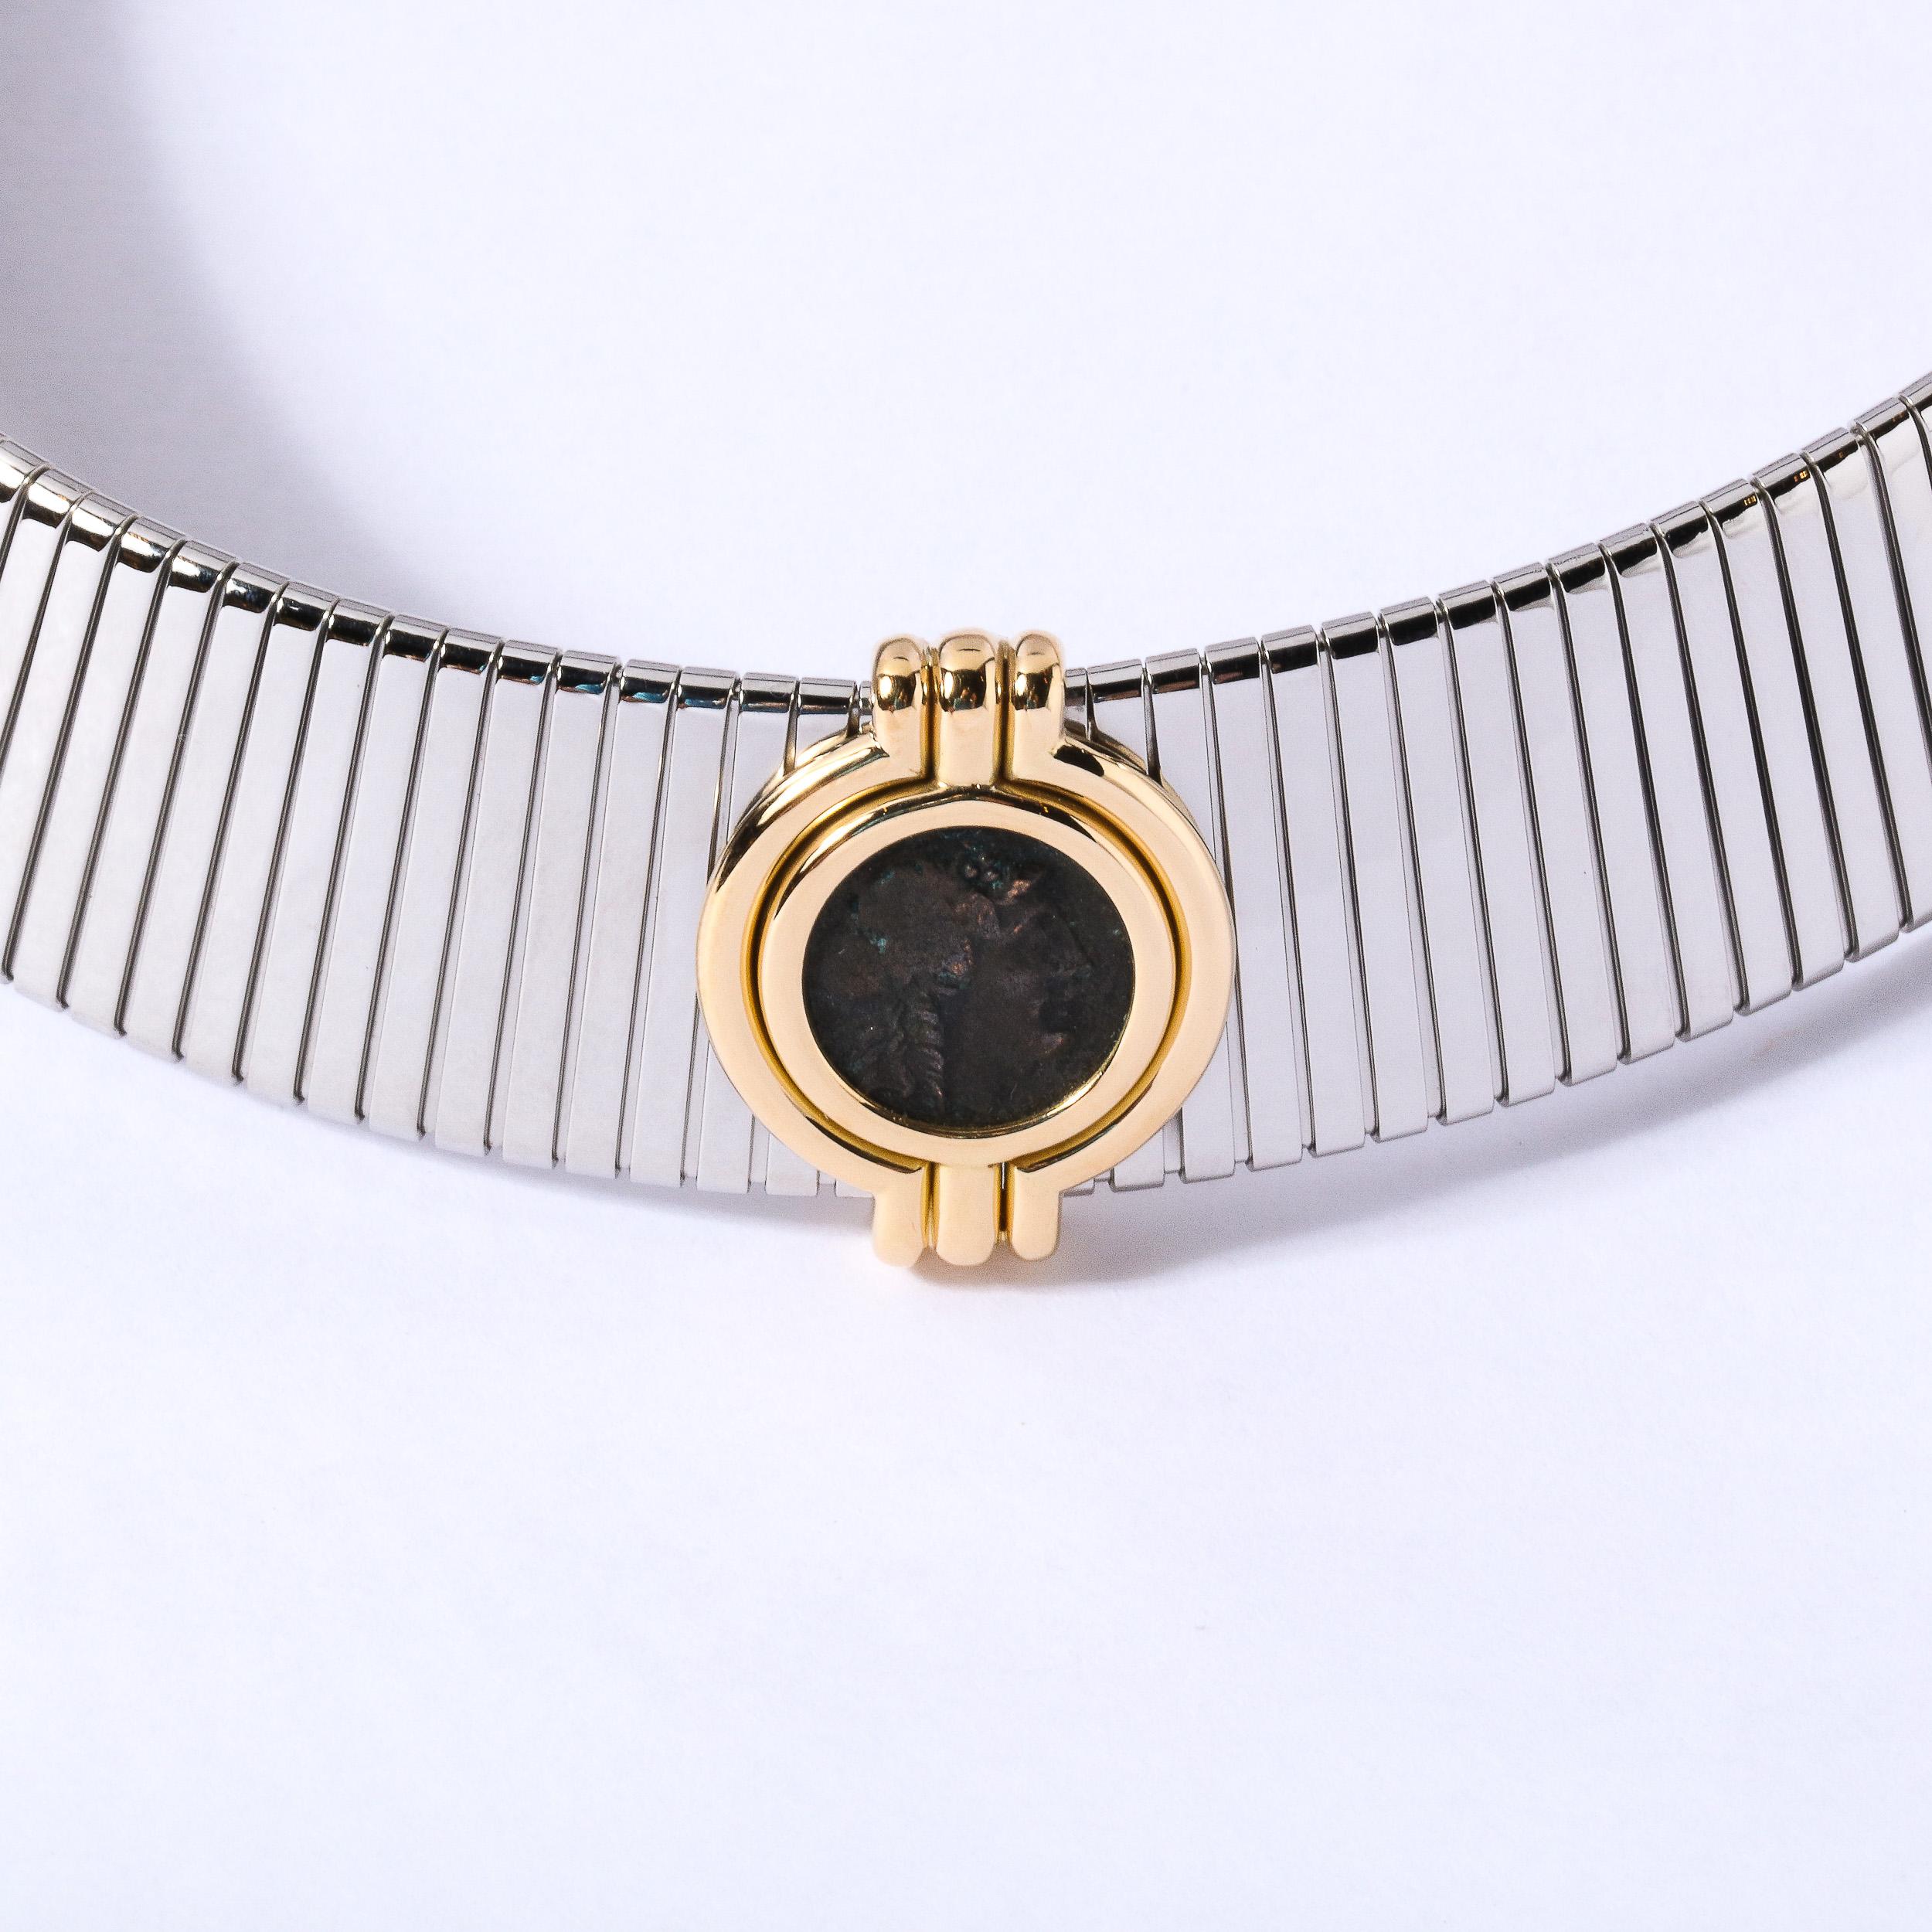 This stunning necklace is made of 18k gold and steel. Tubogas necklace from Monete collection set with ancient Greek coin meticulously crafted by Bulgari .Necklace is 18 inches long and 20 mm wide adjustable to fit any neck size. Weight is 95.4